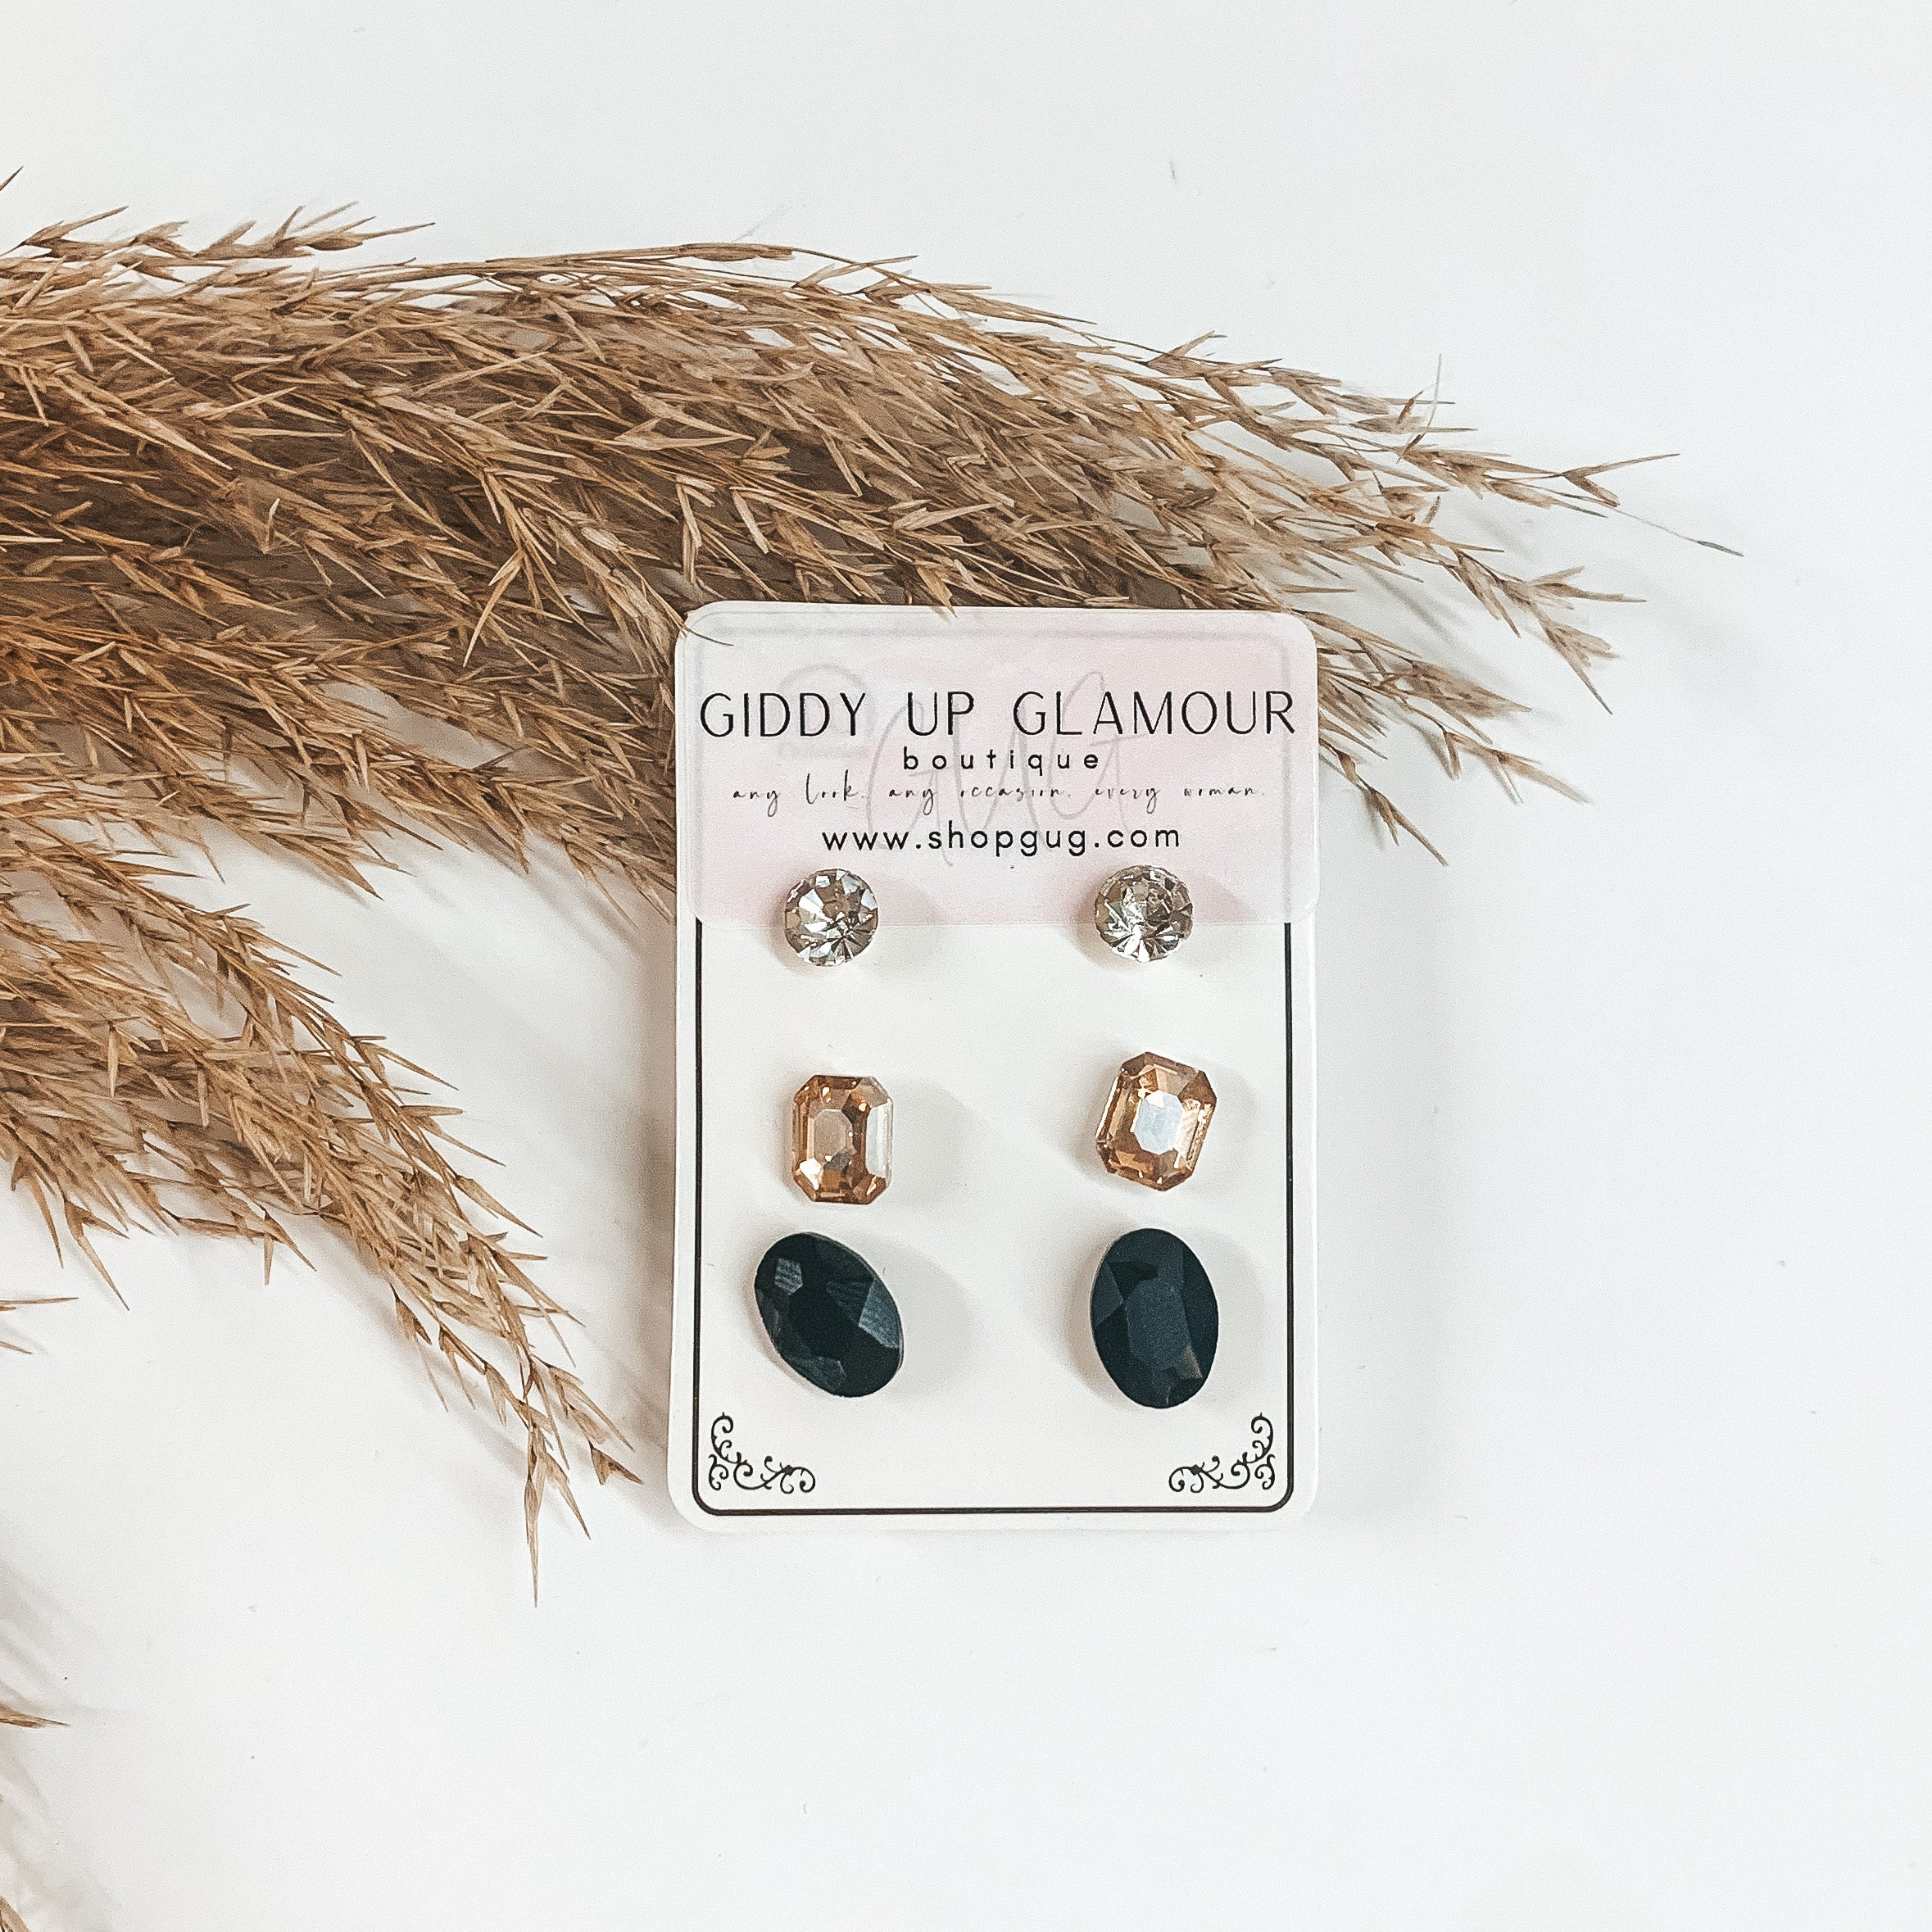 Buy 3 for $10 | Pack of Three | Faux Crystal Stud Earrings in Ovals - Giddy Up Glamour Boutique